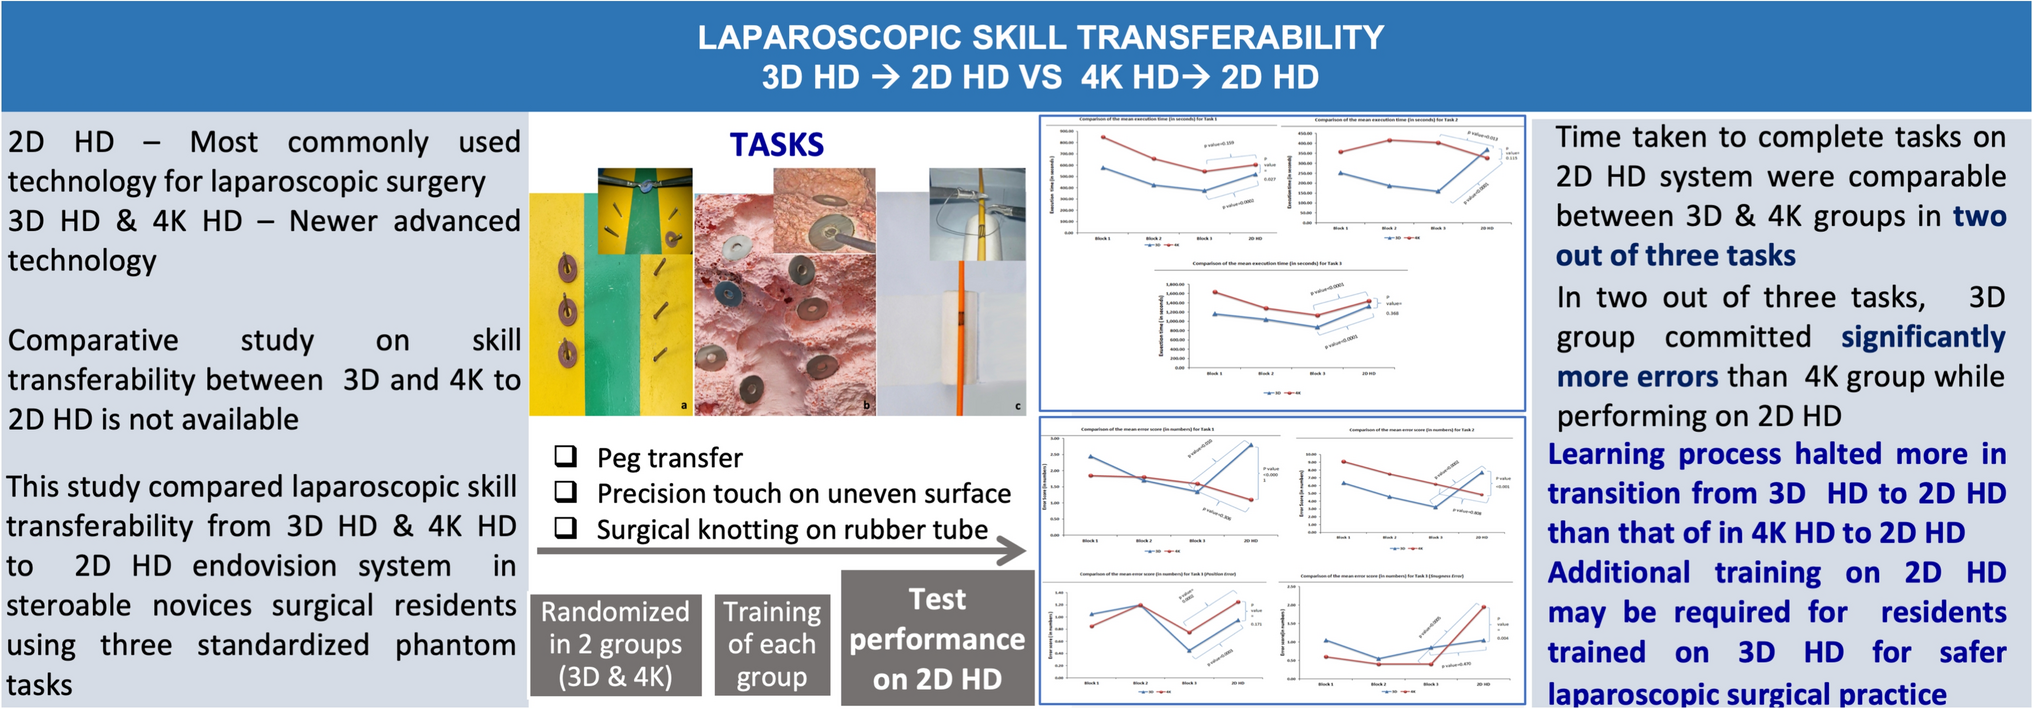 Transferability of laparoscopic skills acquired from three-dimensional high-definition and ultra-high definition endovision system to two-dimensional high-definition endovision system: an ex-vivo randomized study